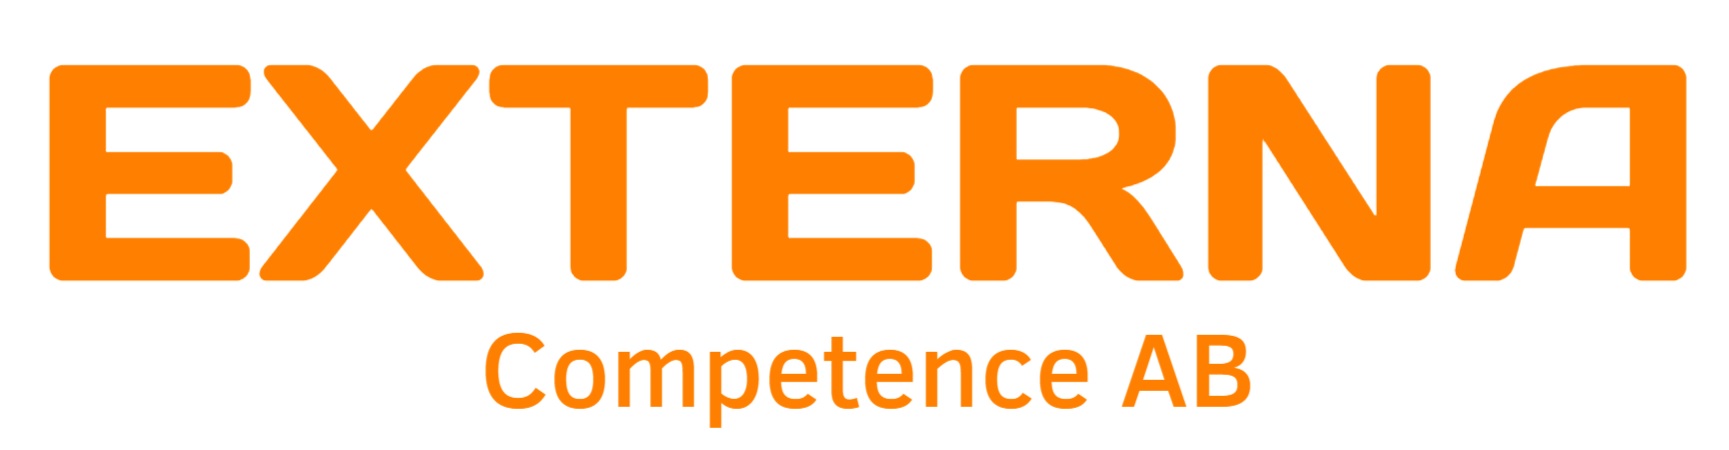 EXTERNA Competence AB